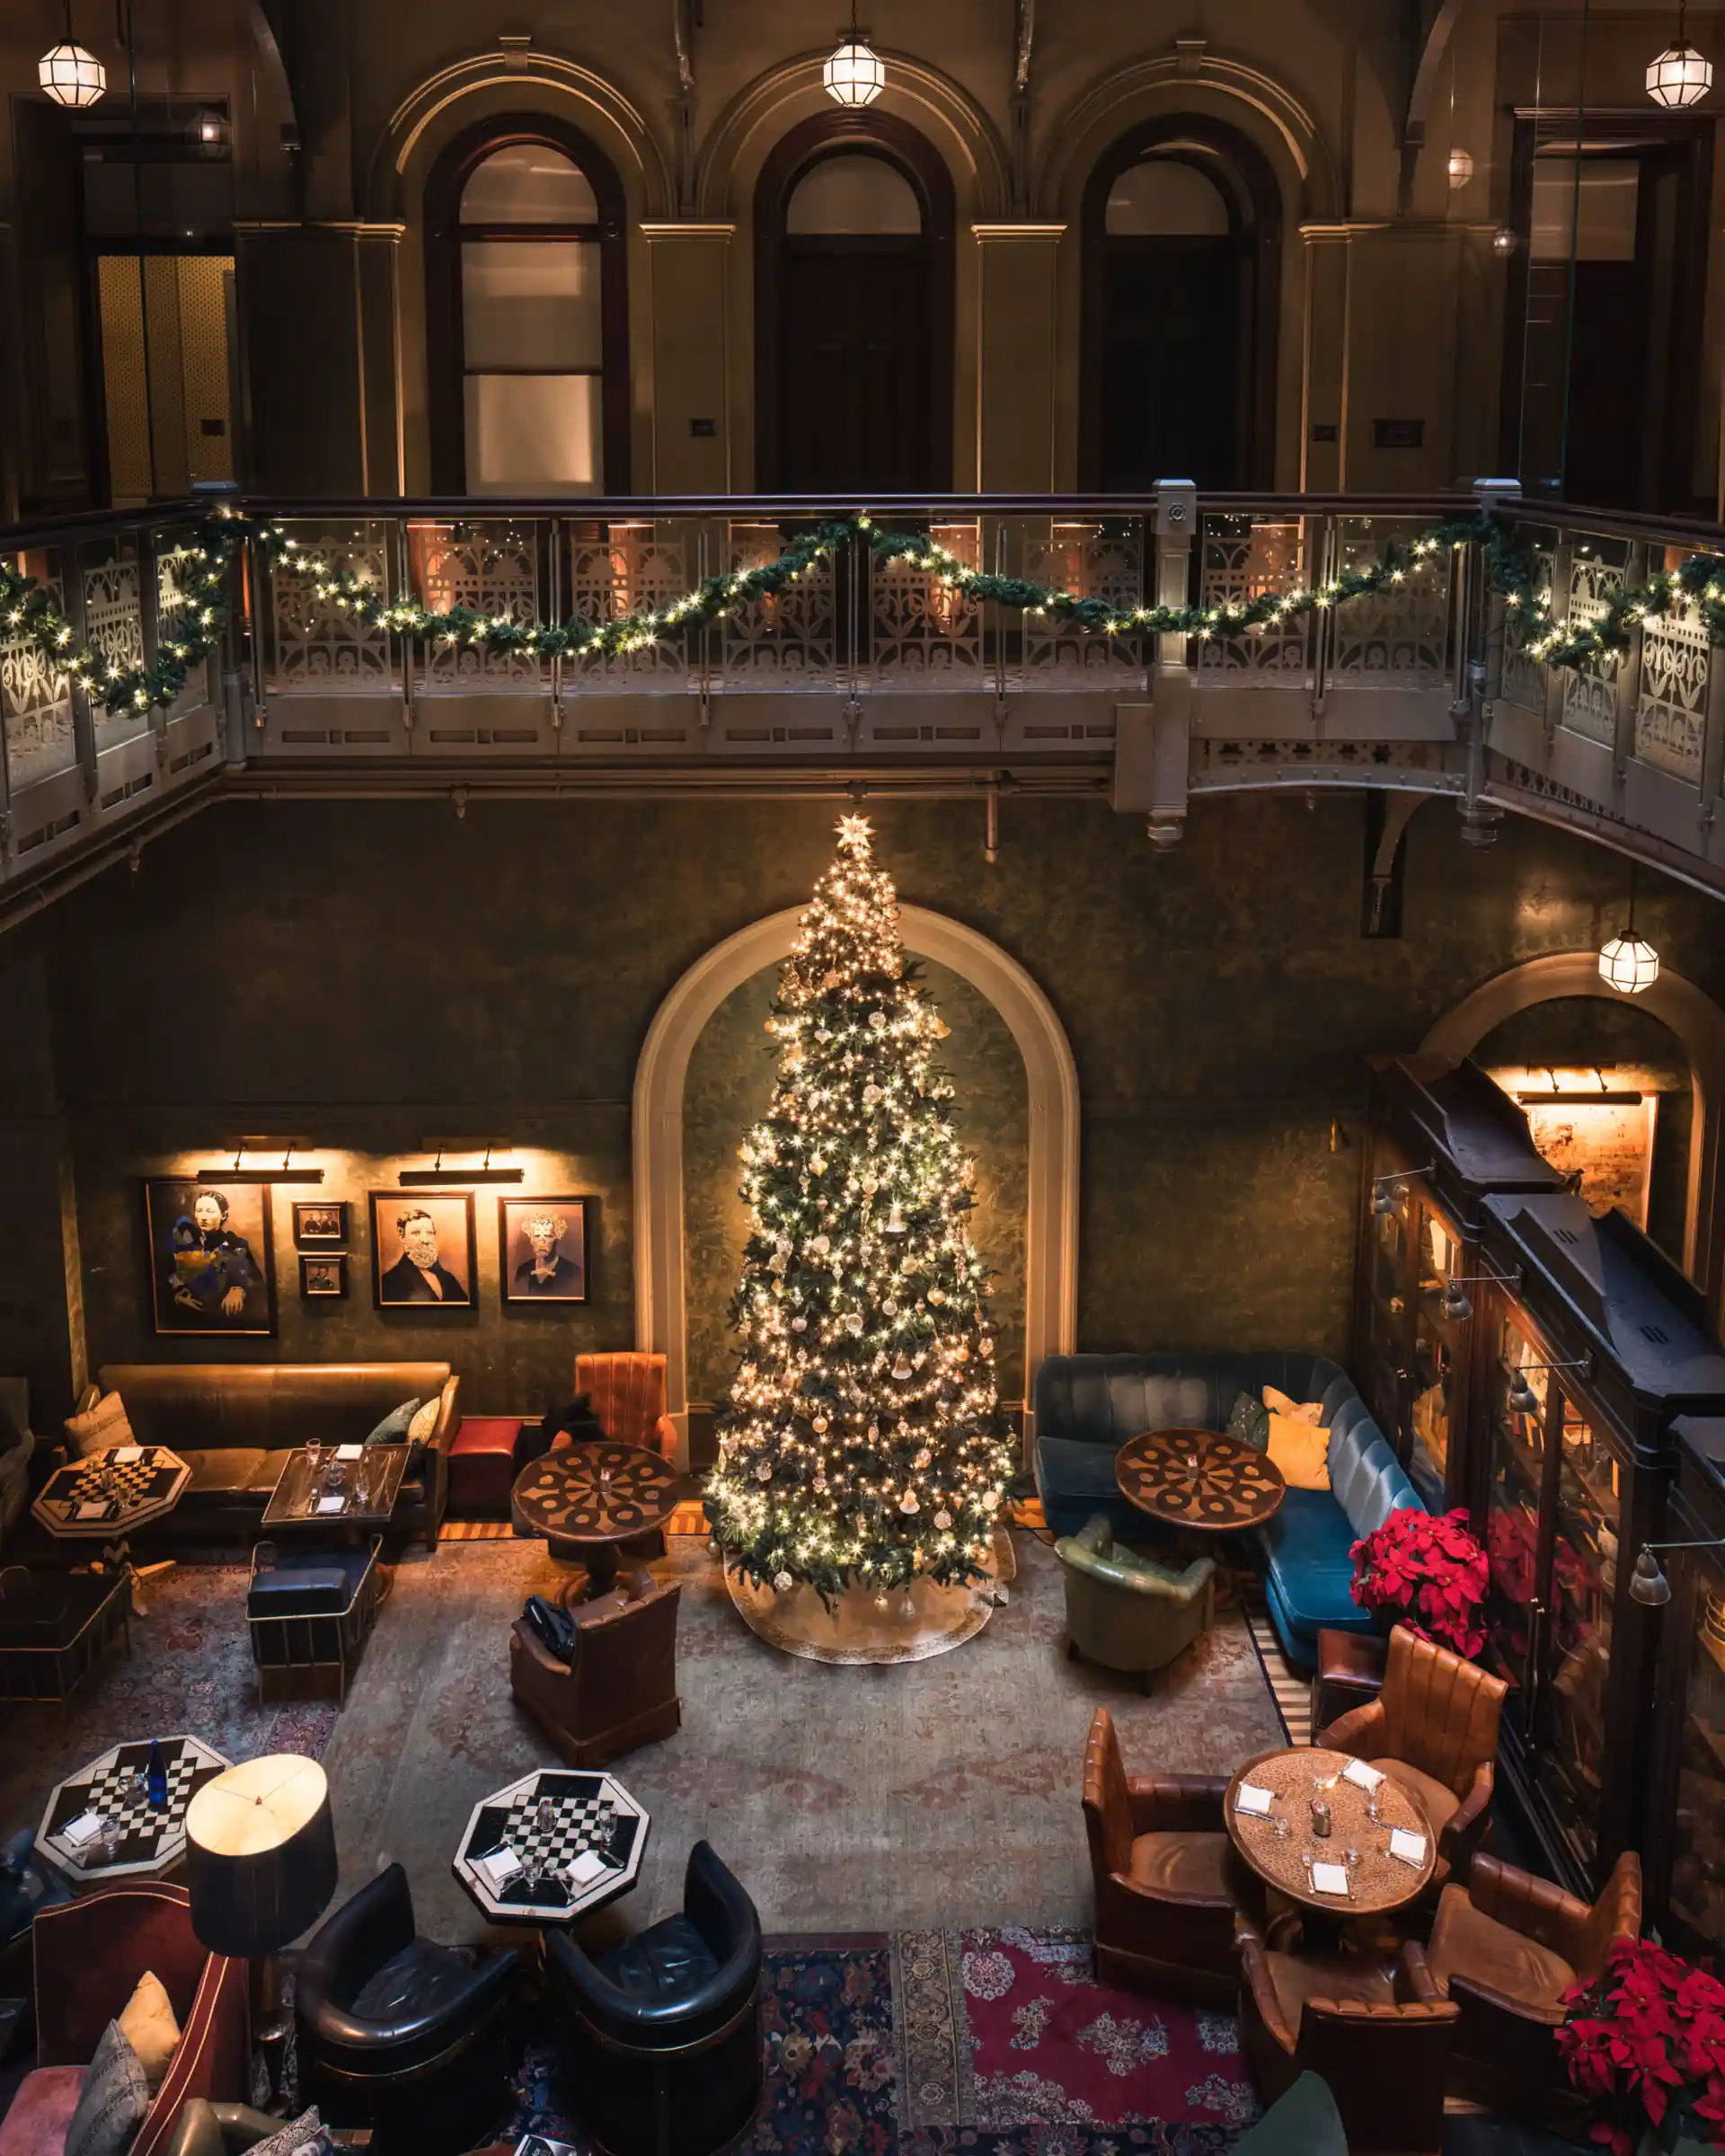 Aerial photo captures the lobby with assorted cozy chairs near a festive Christmas tree.